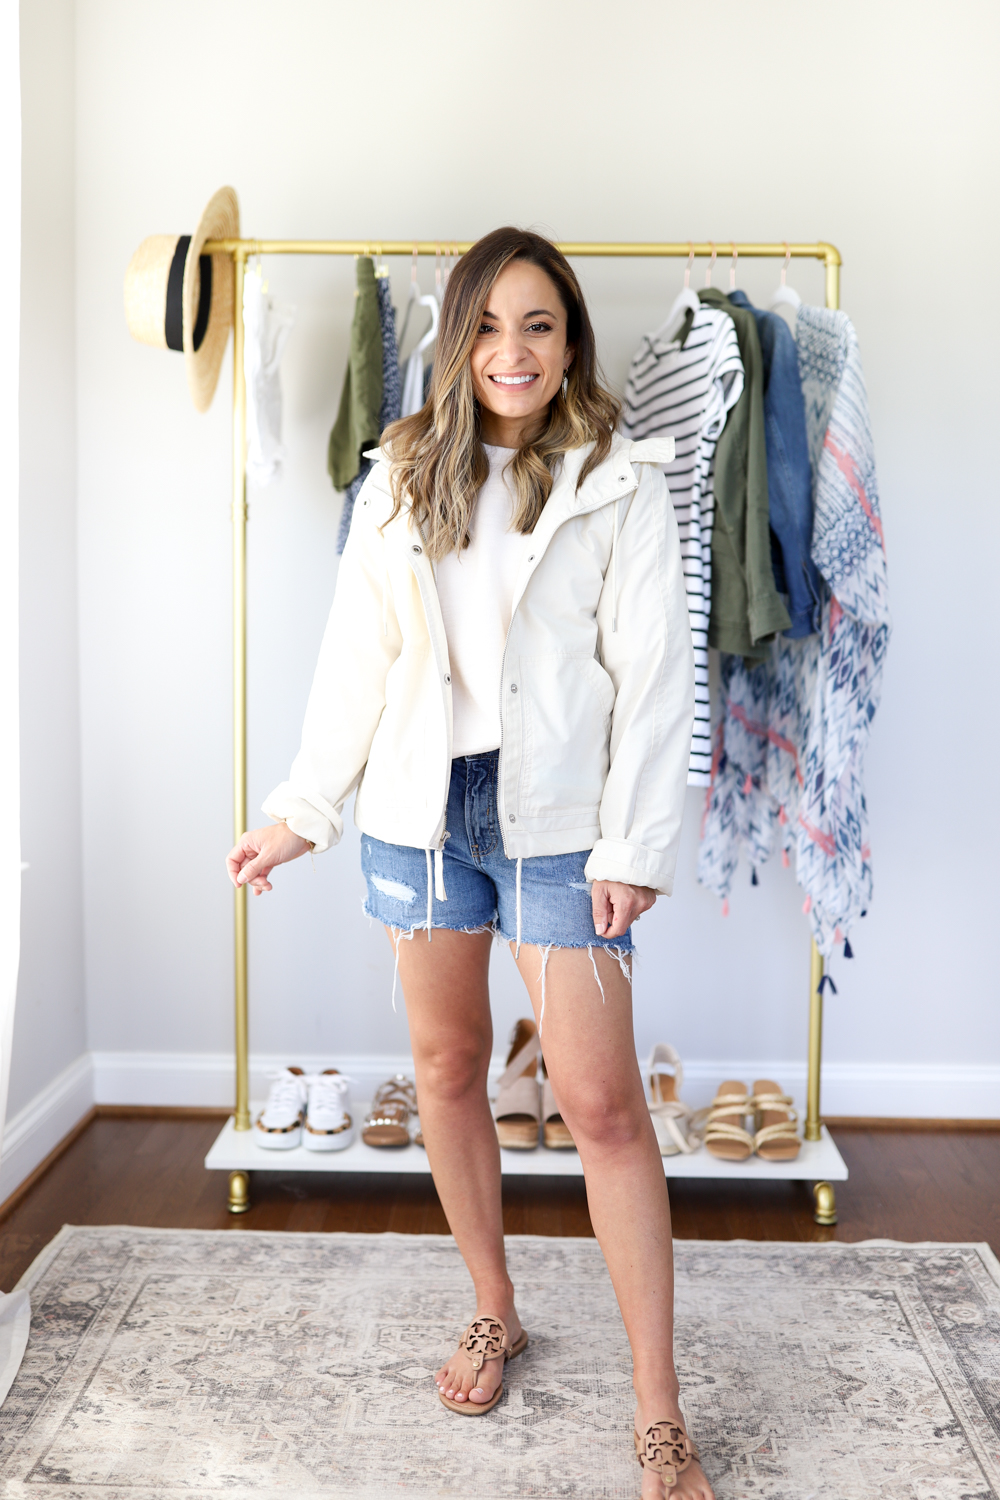 30 SPRING OUTFIT IDEAS: SPRING STYLING SERIES WEEK ONE